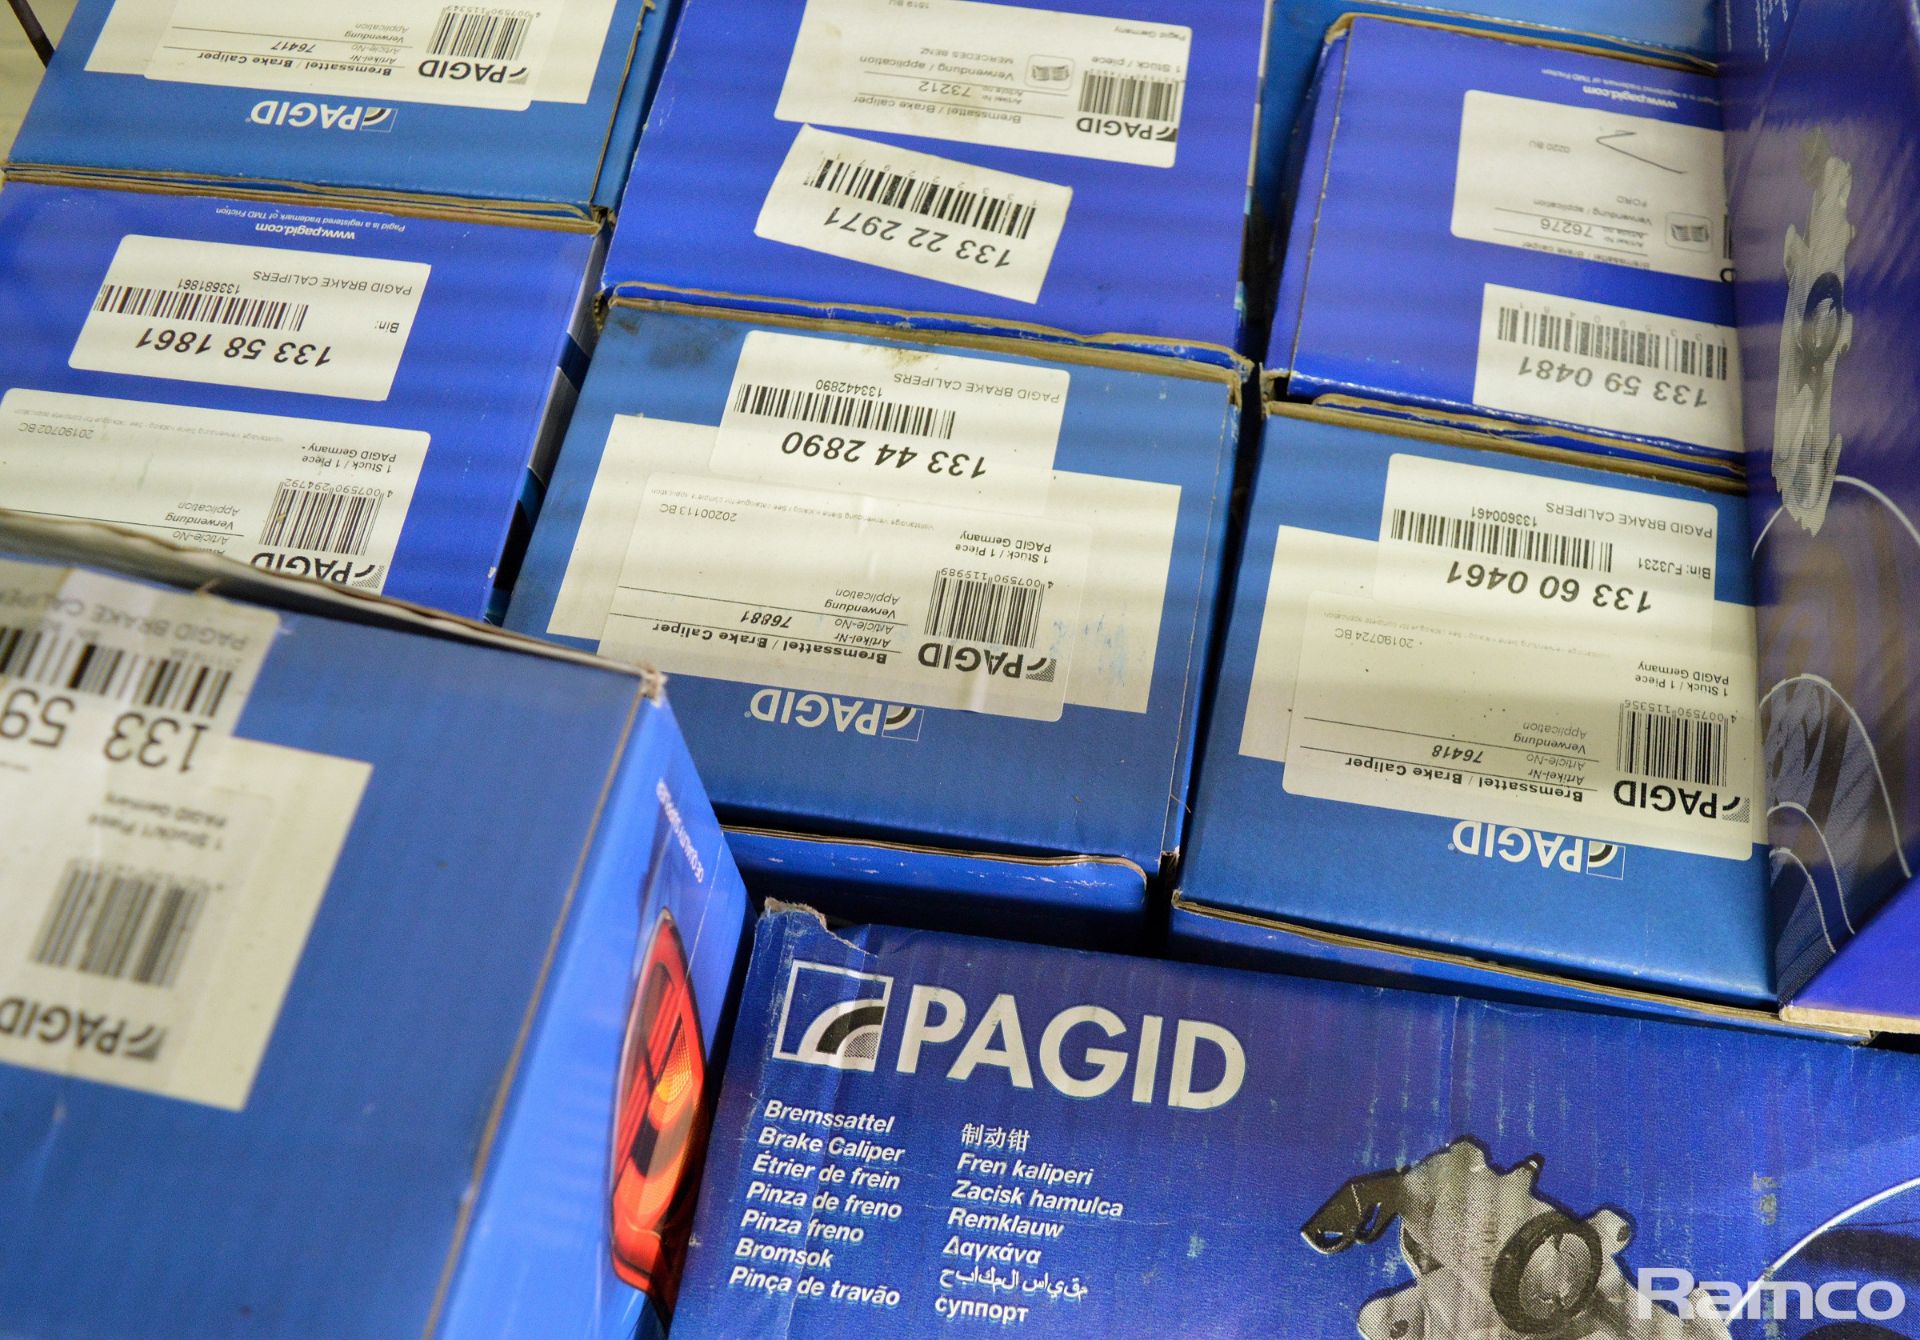 Pagid brake calipers - see pictures for model / type - Image 4 of 7